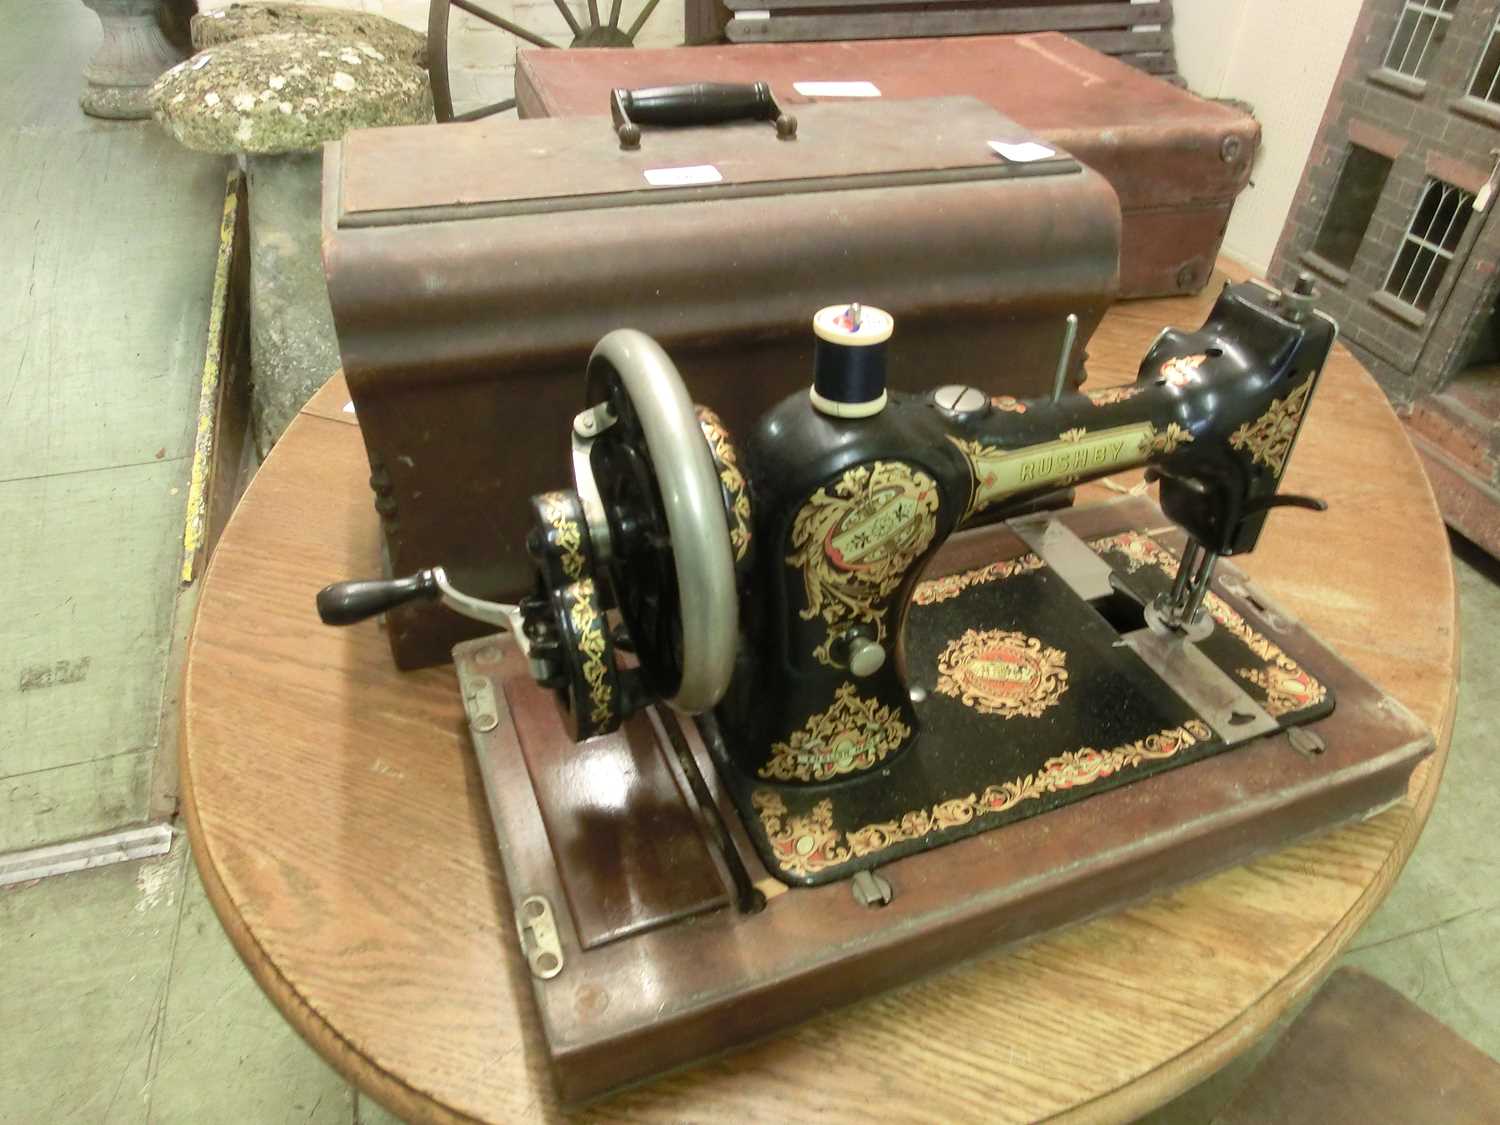 A walnut cased Rushby manual sewing machine